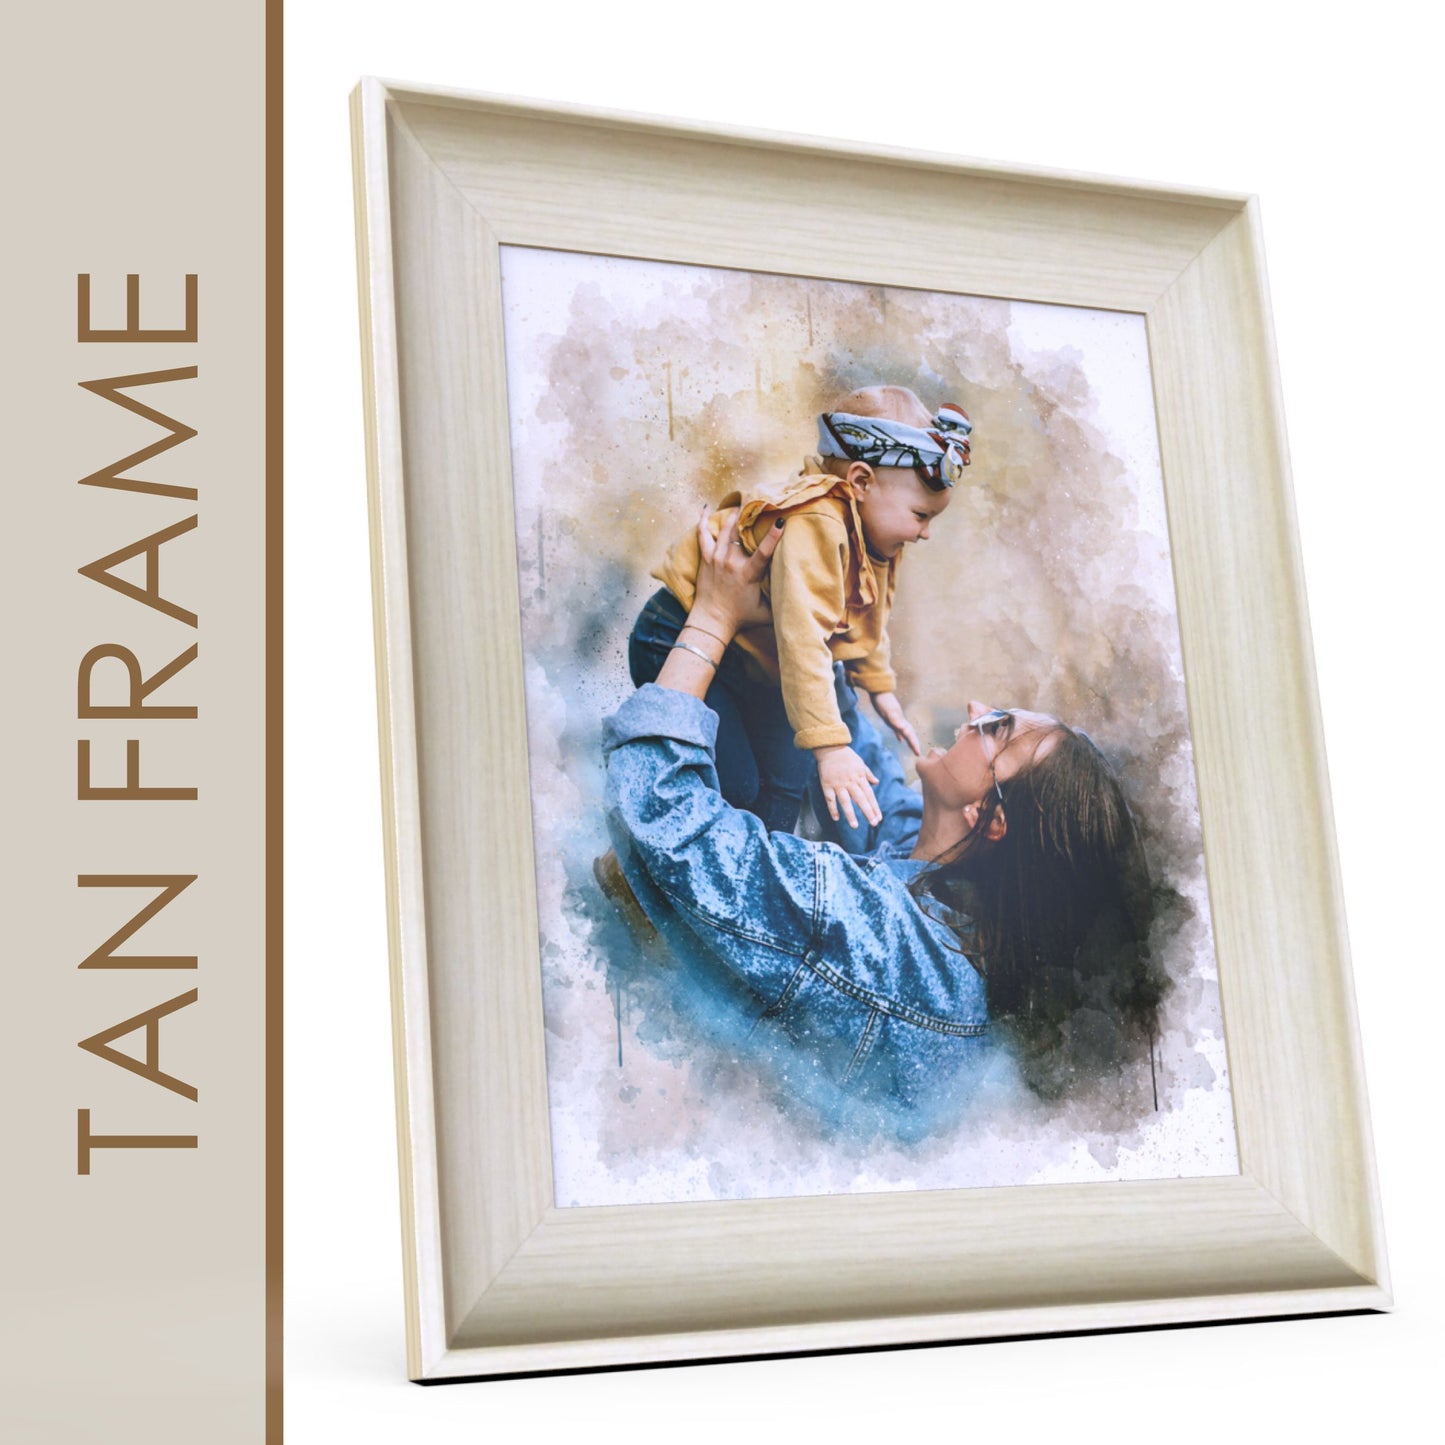 Tanned Framed Watercolor Portrait from Photo